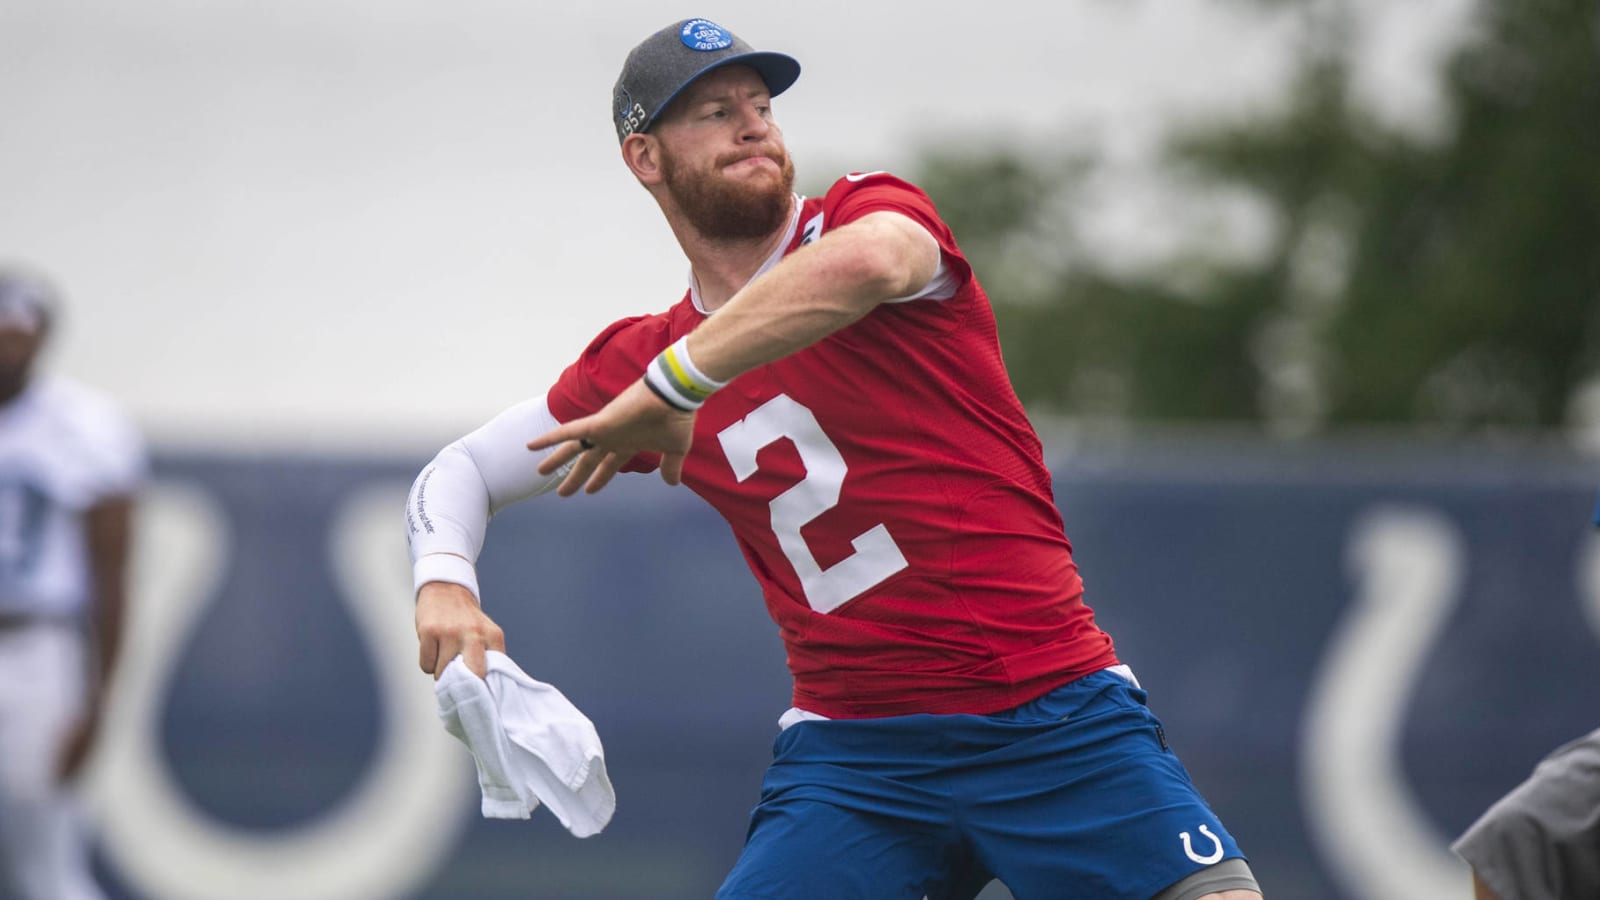 Colts' Wentz, Nelson ahead of schedule, could start in Week 1